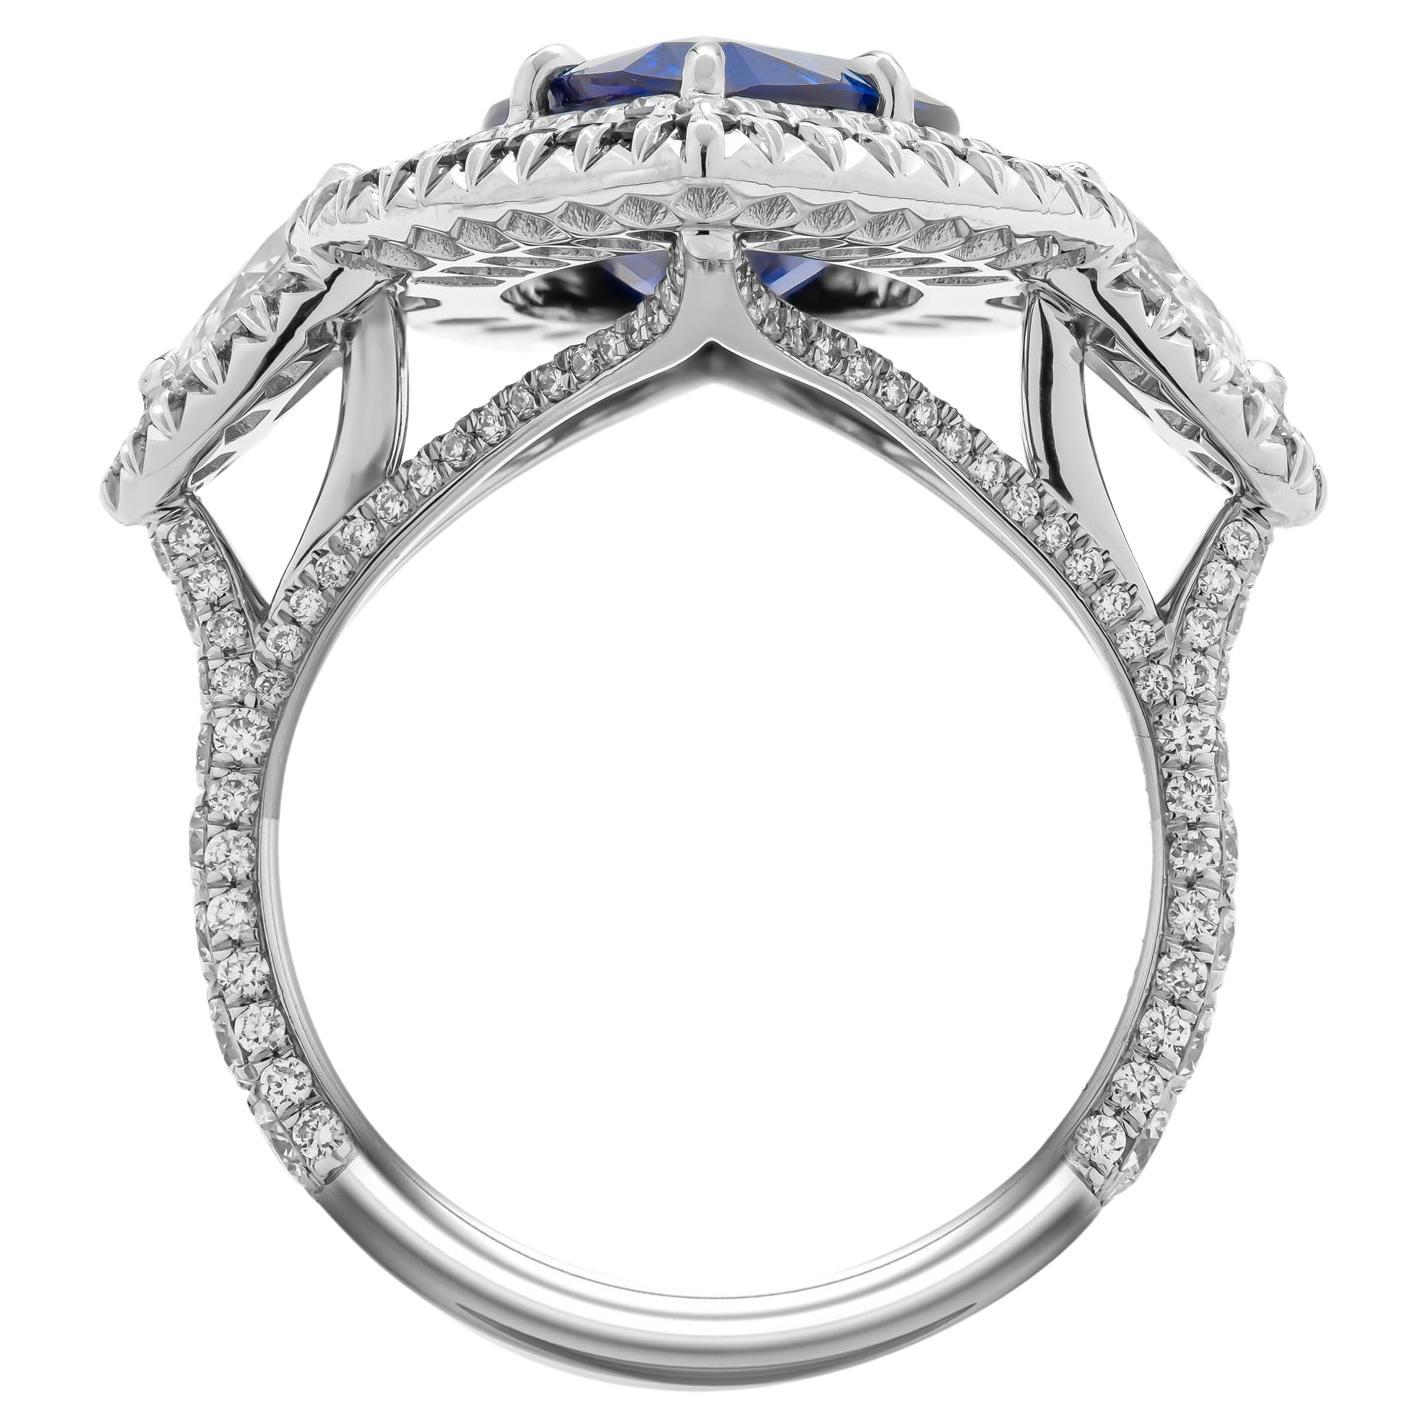 3 stone ring in PT950 with blue sapphire
Double halo around center stone, with blue sapphires, diamond shank and halos around side stones; 
Side stones: 0.74 tcw G VS1
Center stone: 5.04 Sapphire Pear Shape GIA#2221376740
 Melee white: 1.25ct
 Melee